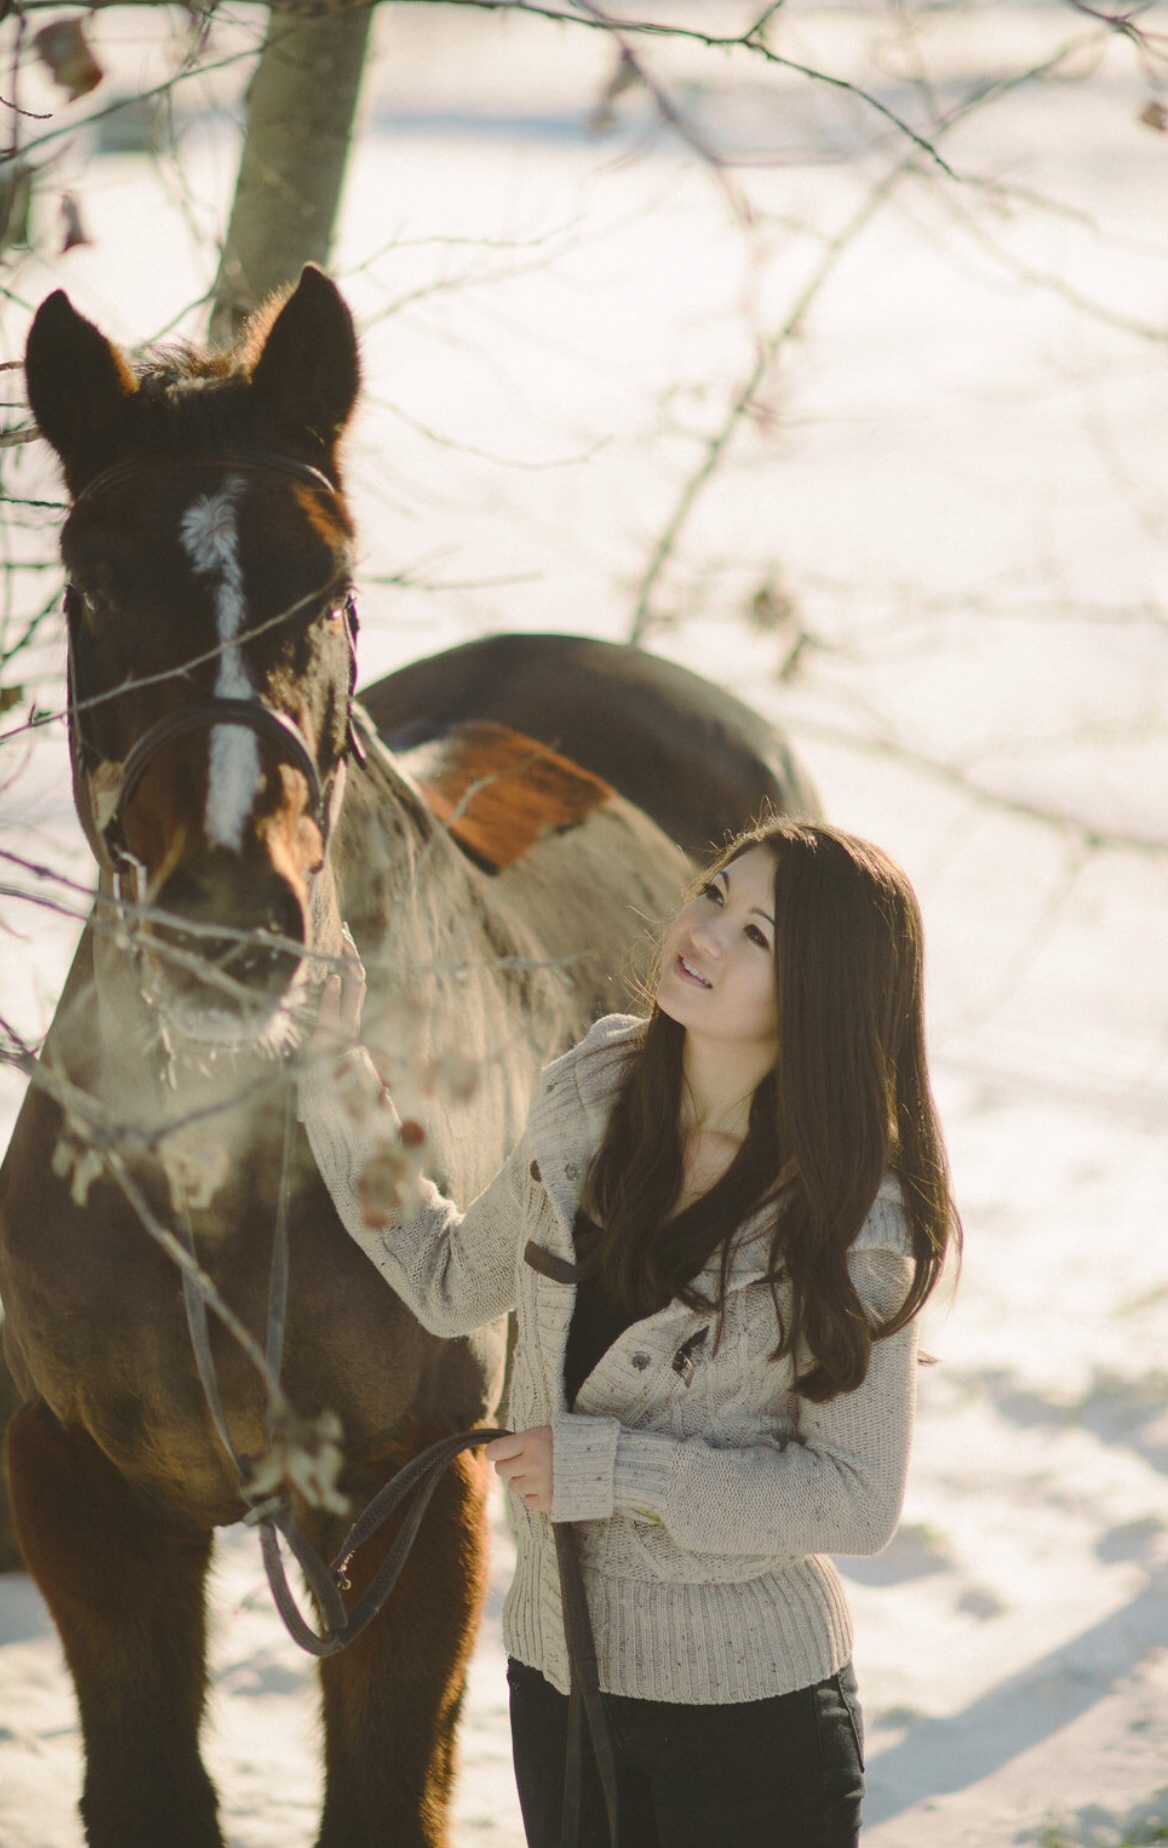 Jessica modelling for Gingersnap Photography's winter shoot